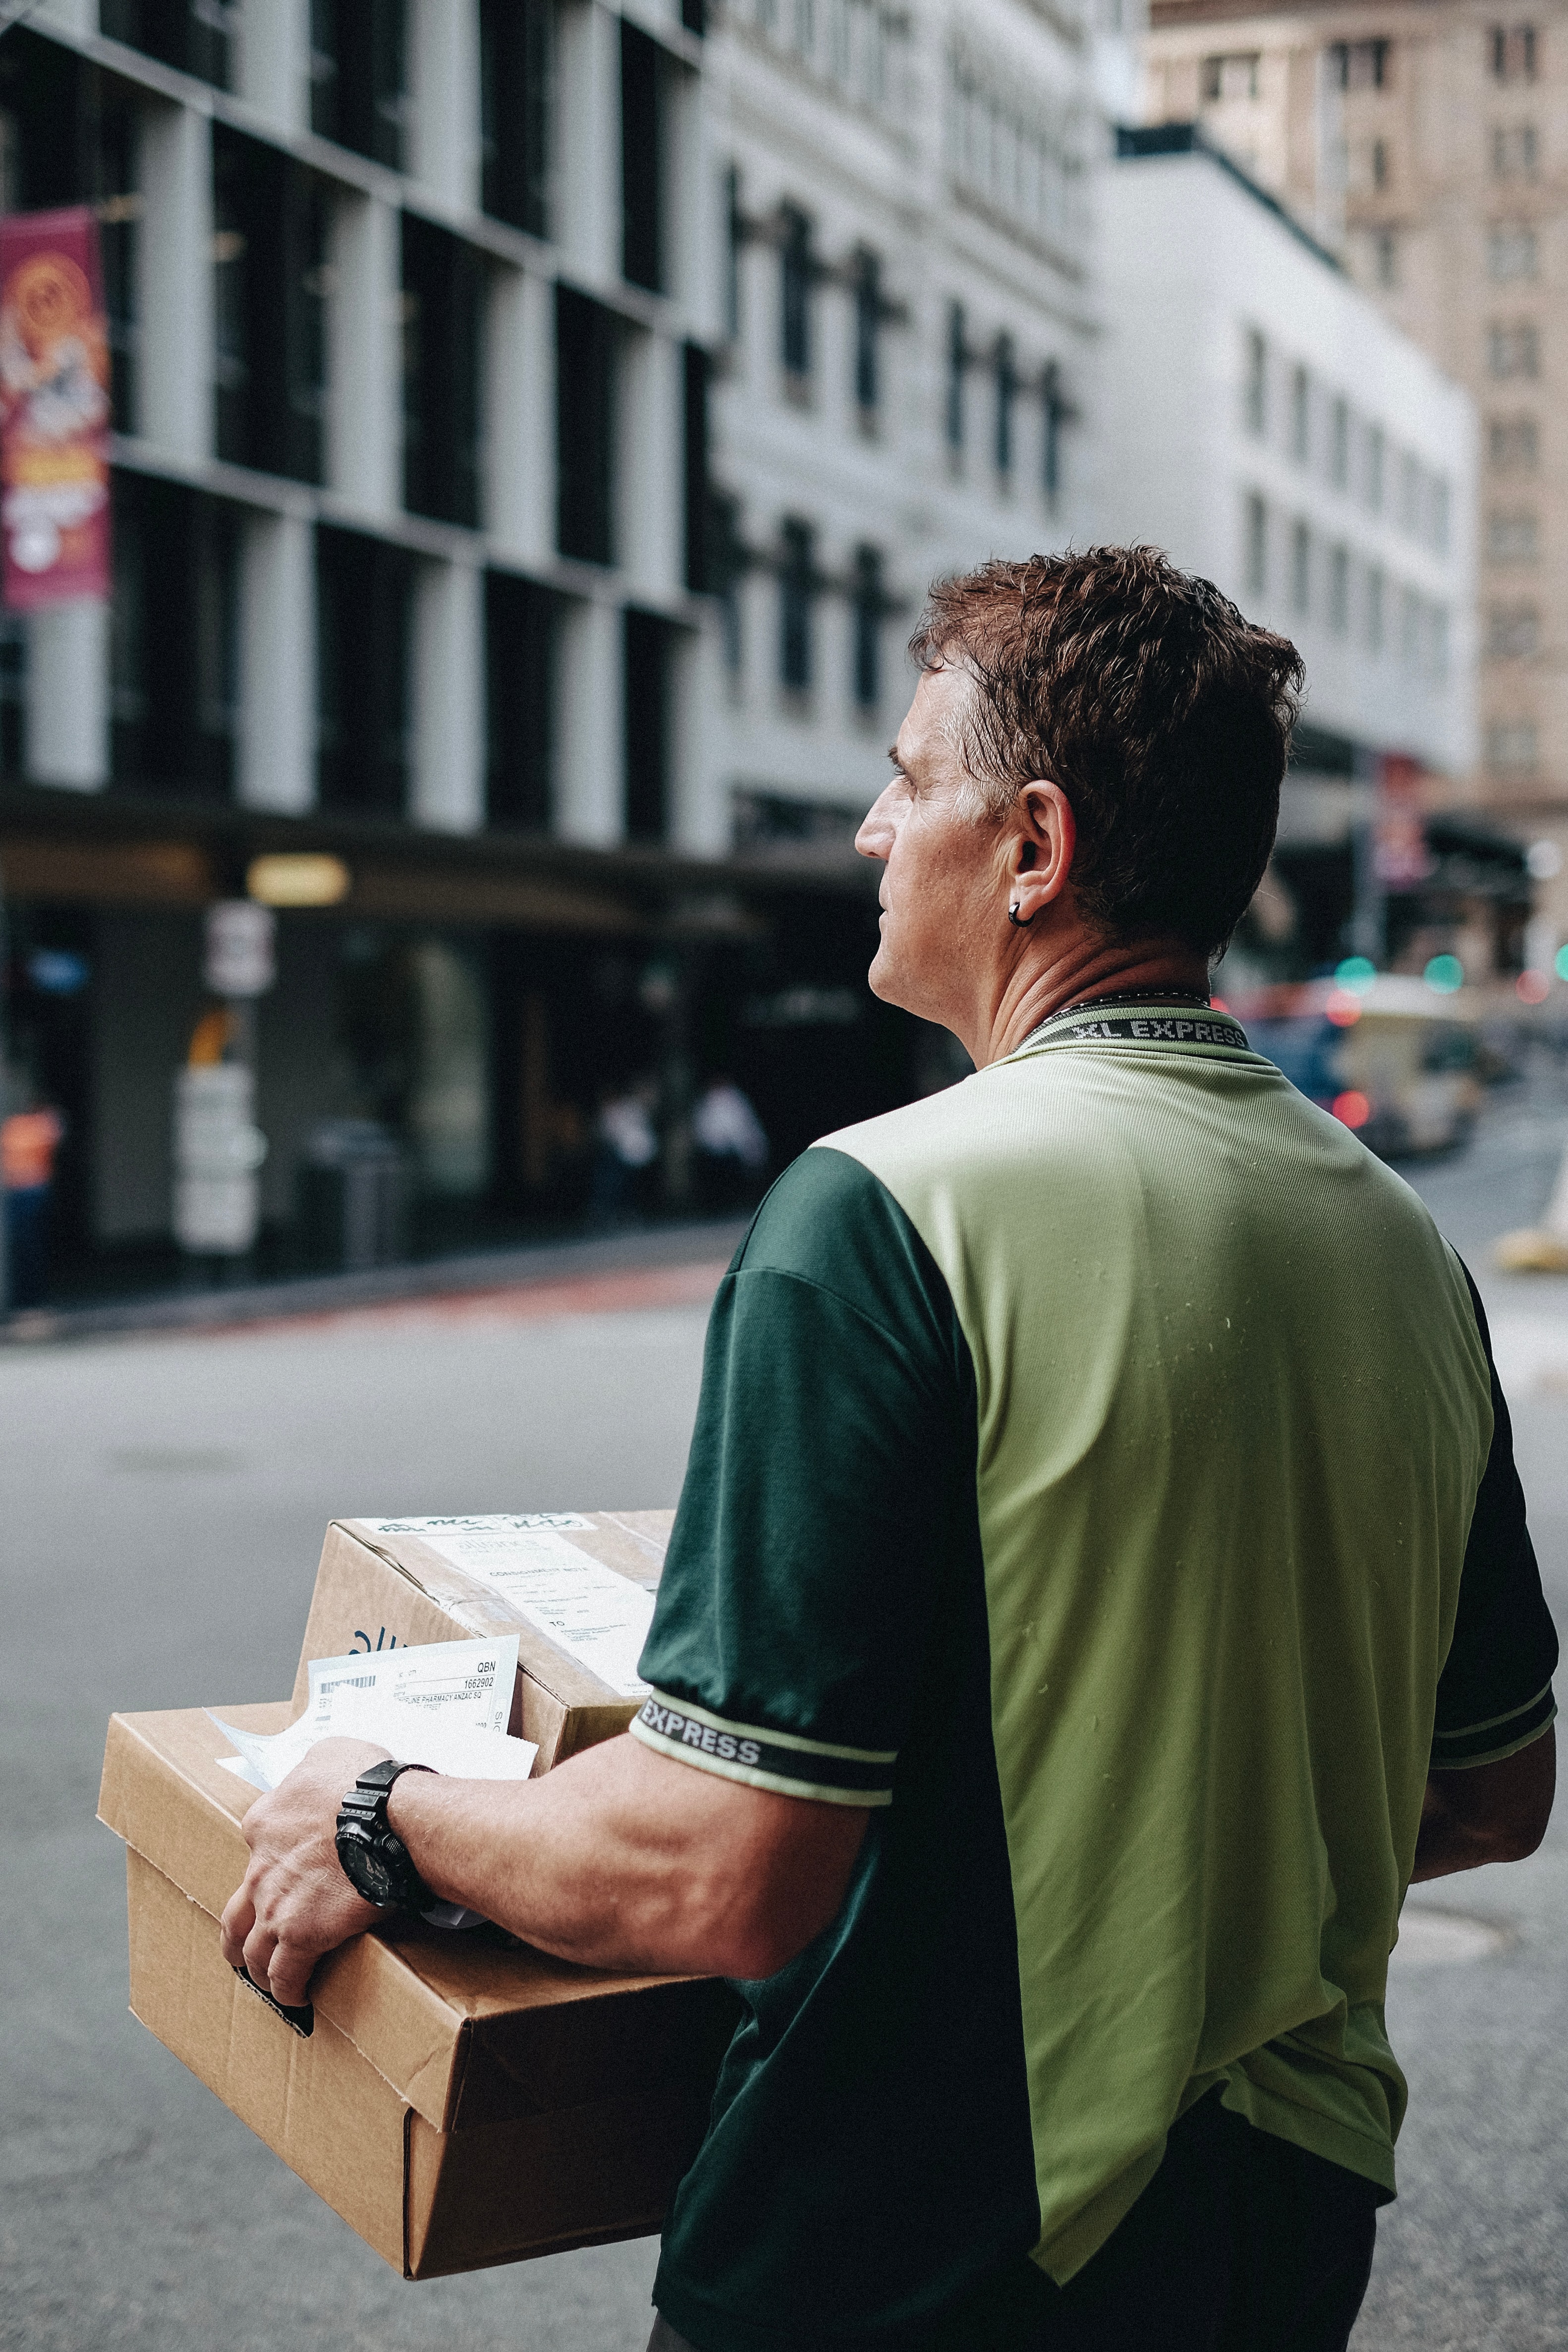 Return process: courier delivering ecommerce packages.